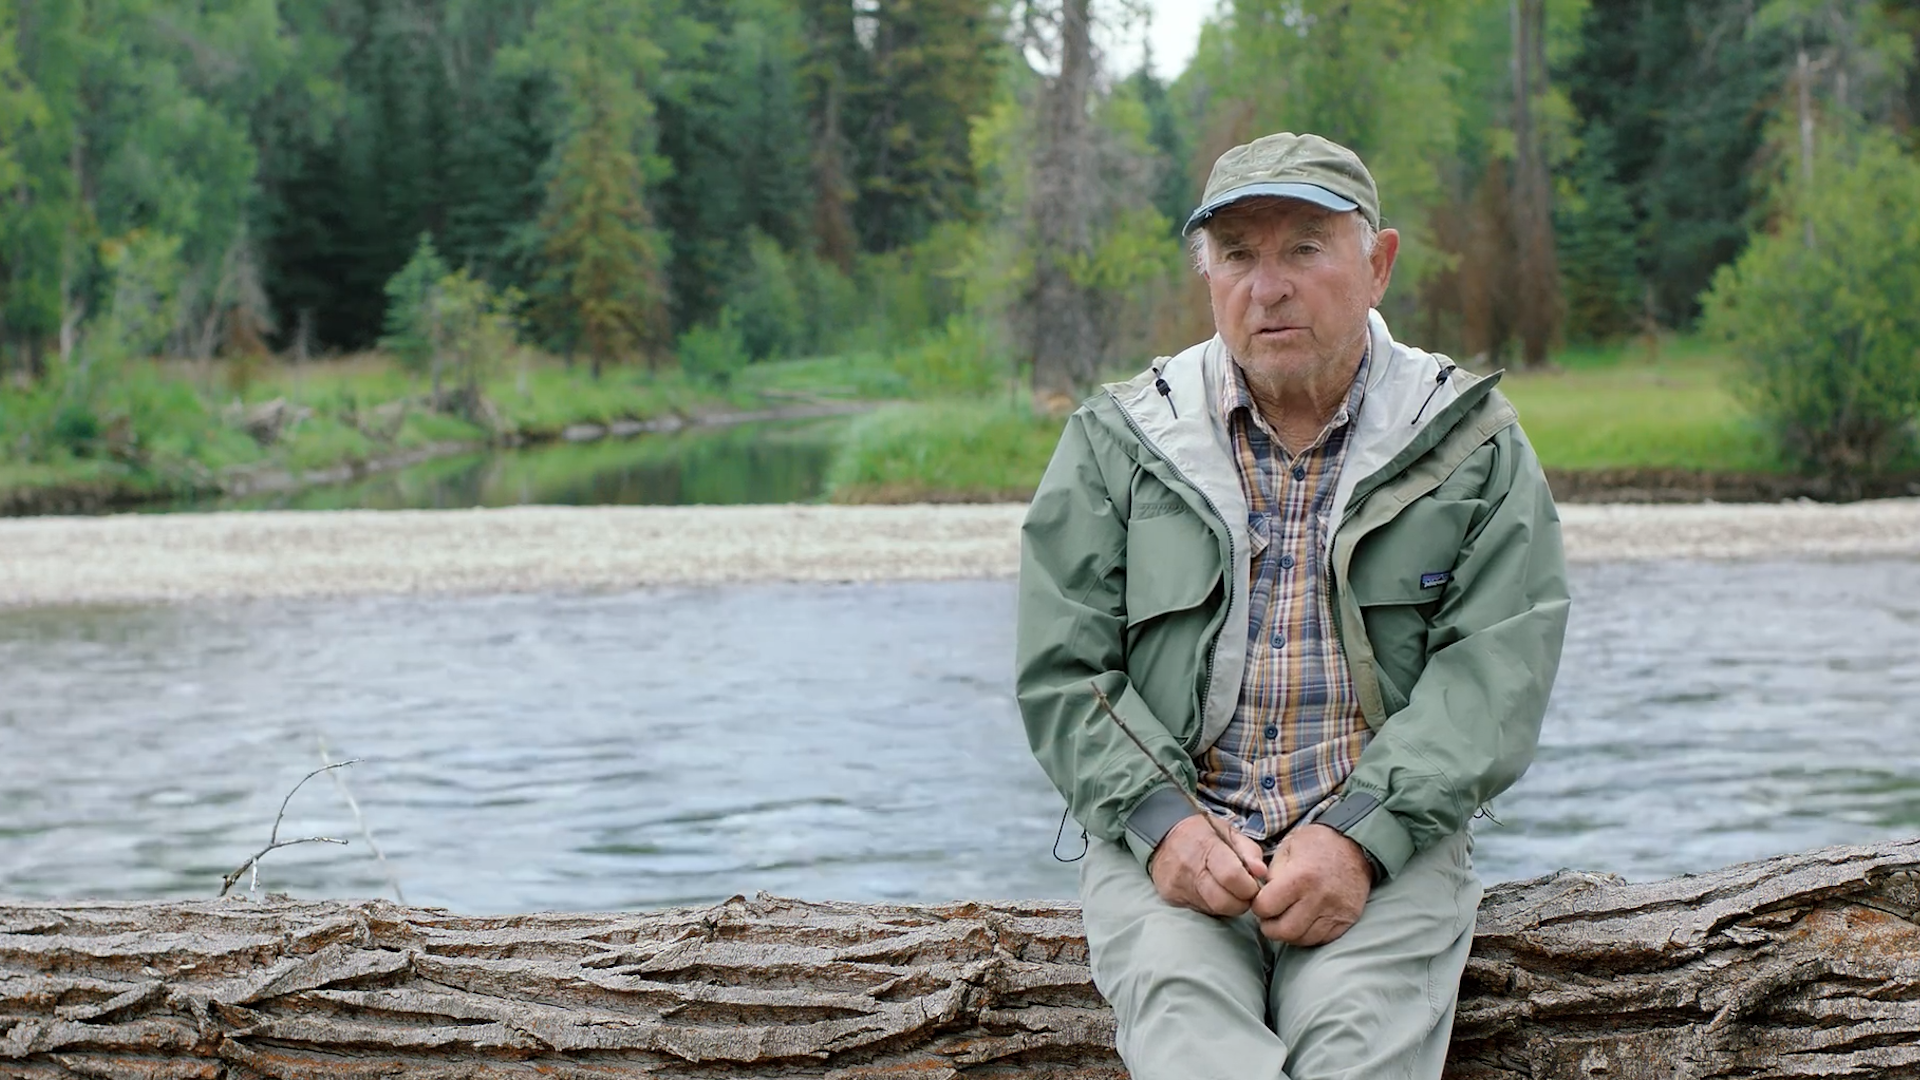 Patagonia founder on public lands: ‘This belongs to all the people in  America’